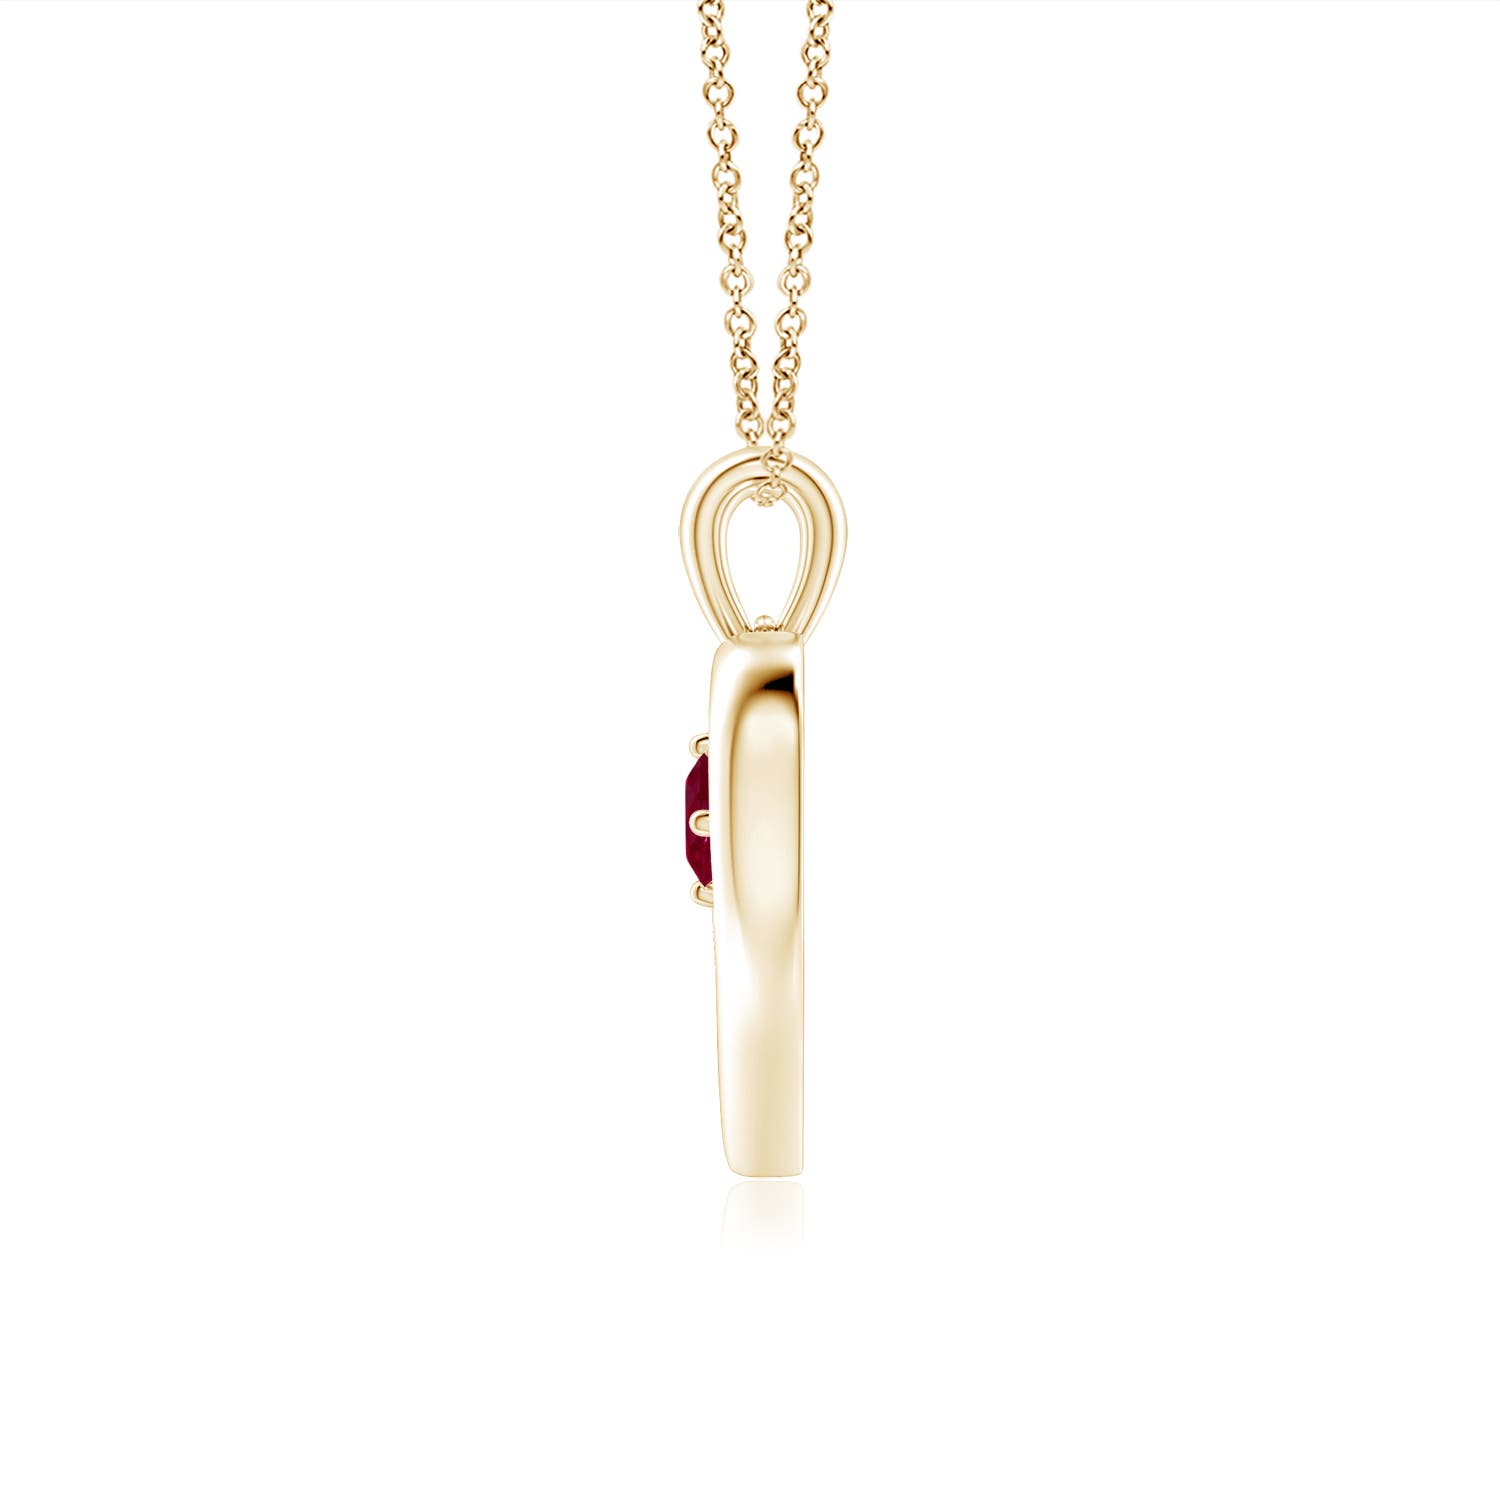 A - Ruby / 0.15 CT / 14 KT Yellow Gold